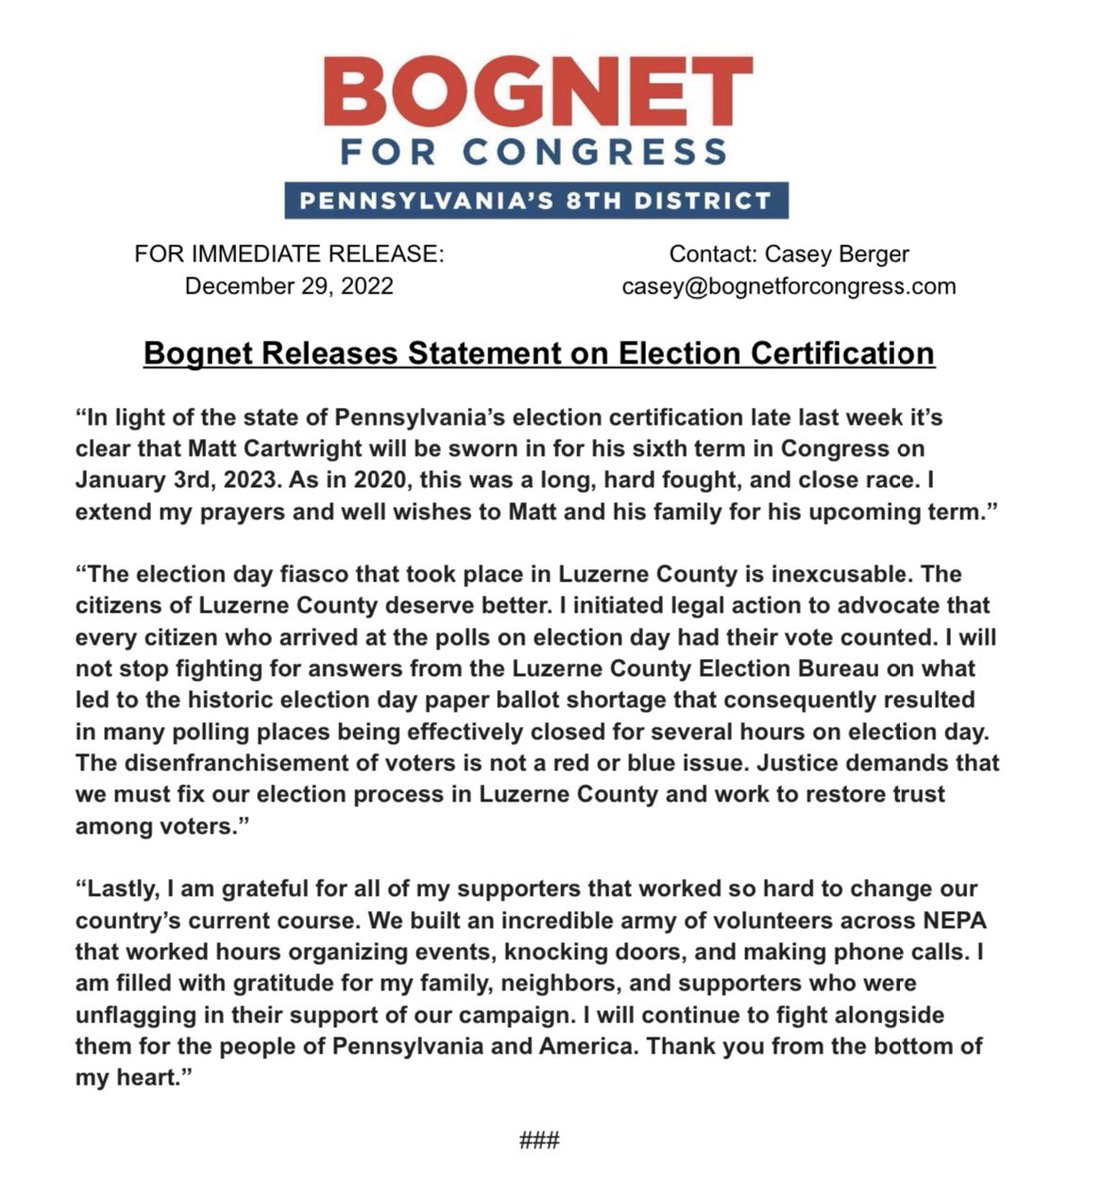 “I am filled with gratitude for my family, neighbors, and supporters who were unflagging in their support of our campaign. I will continue to fight alongside them for the people of Pennsylvania and America.” Read full statement below: